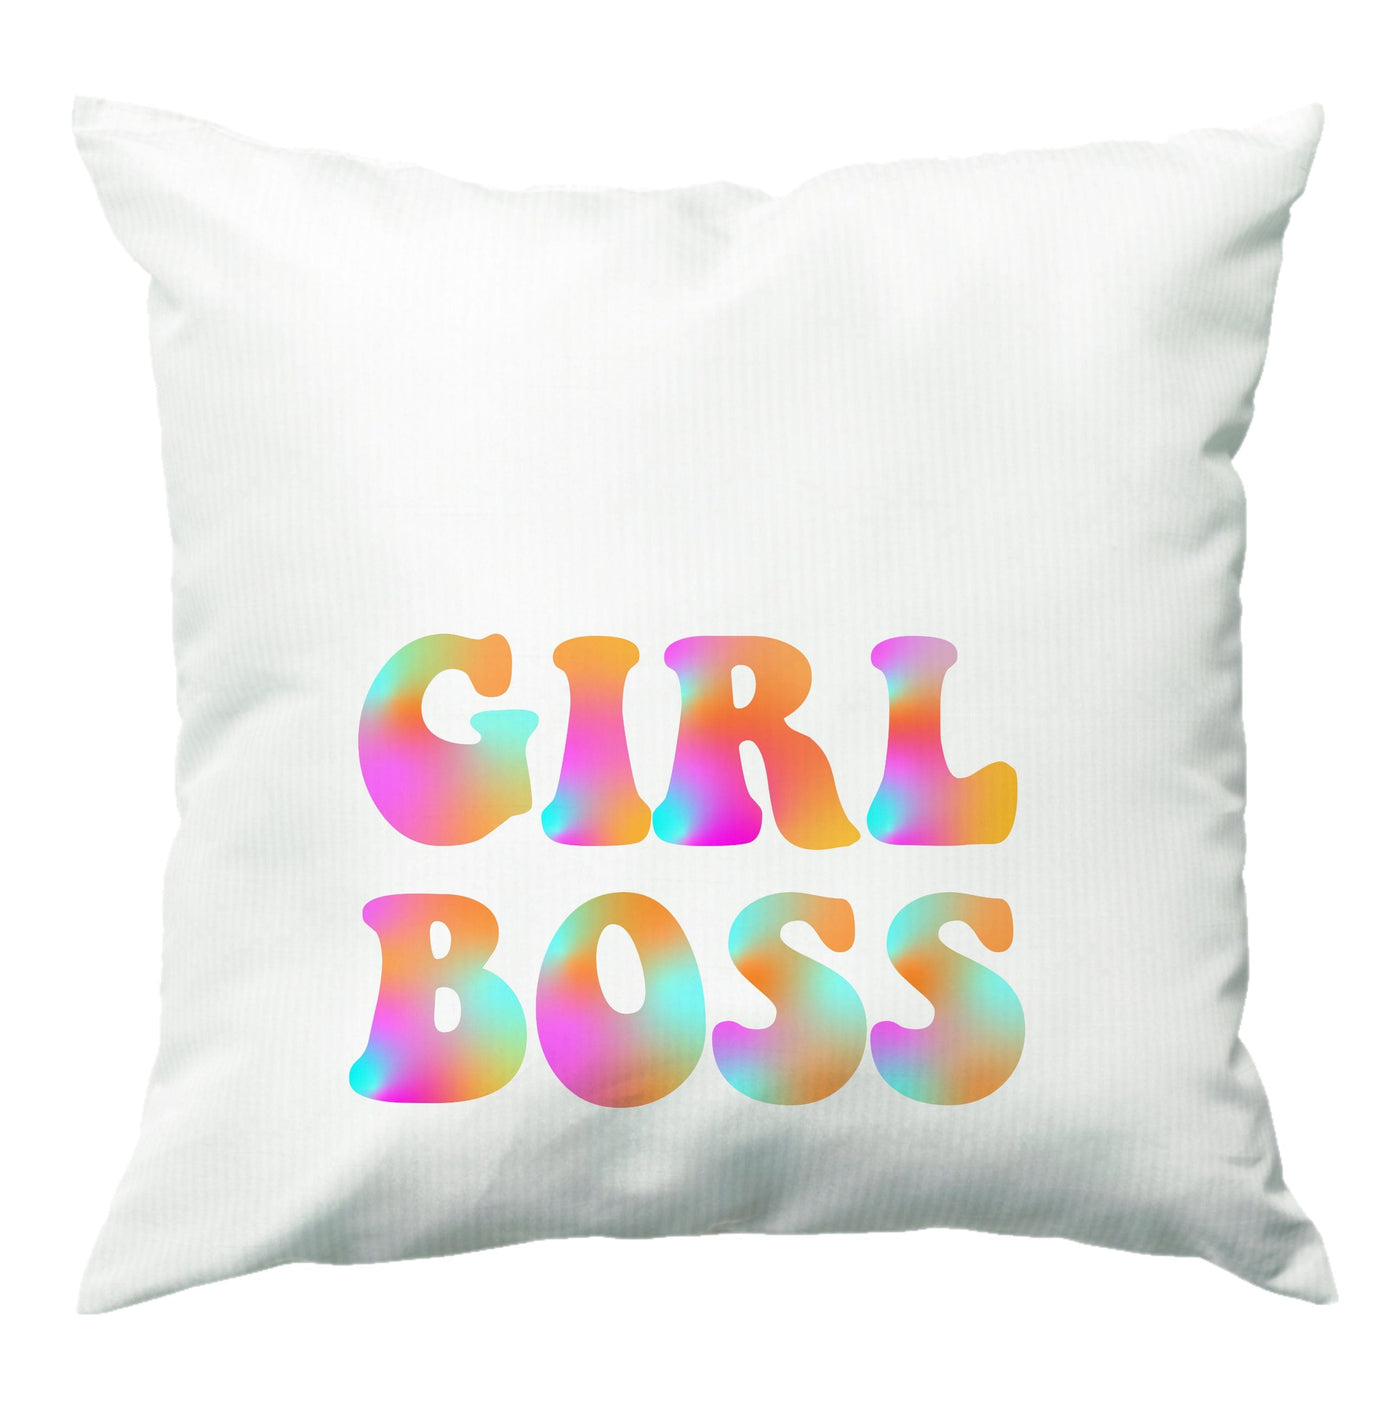 Girl Boss - Aesthetic Quote Cushion